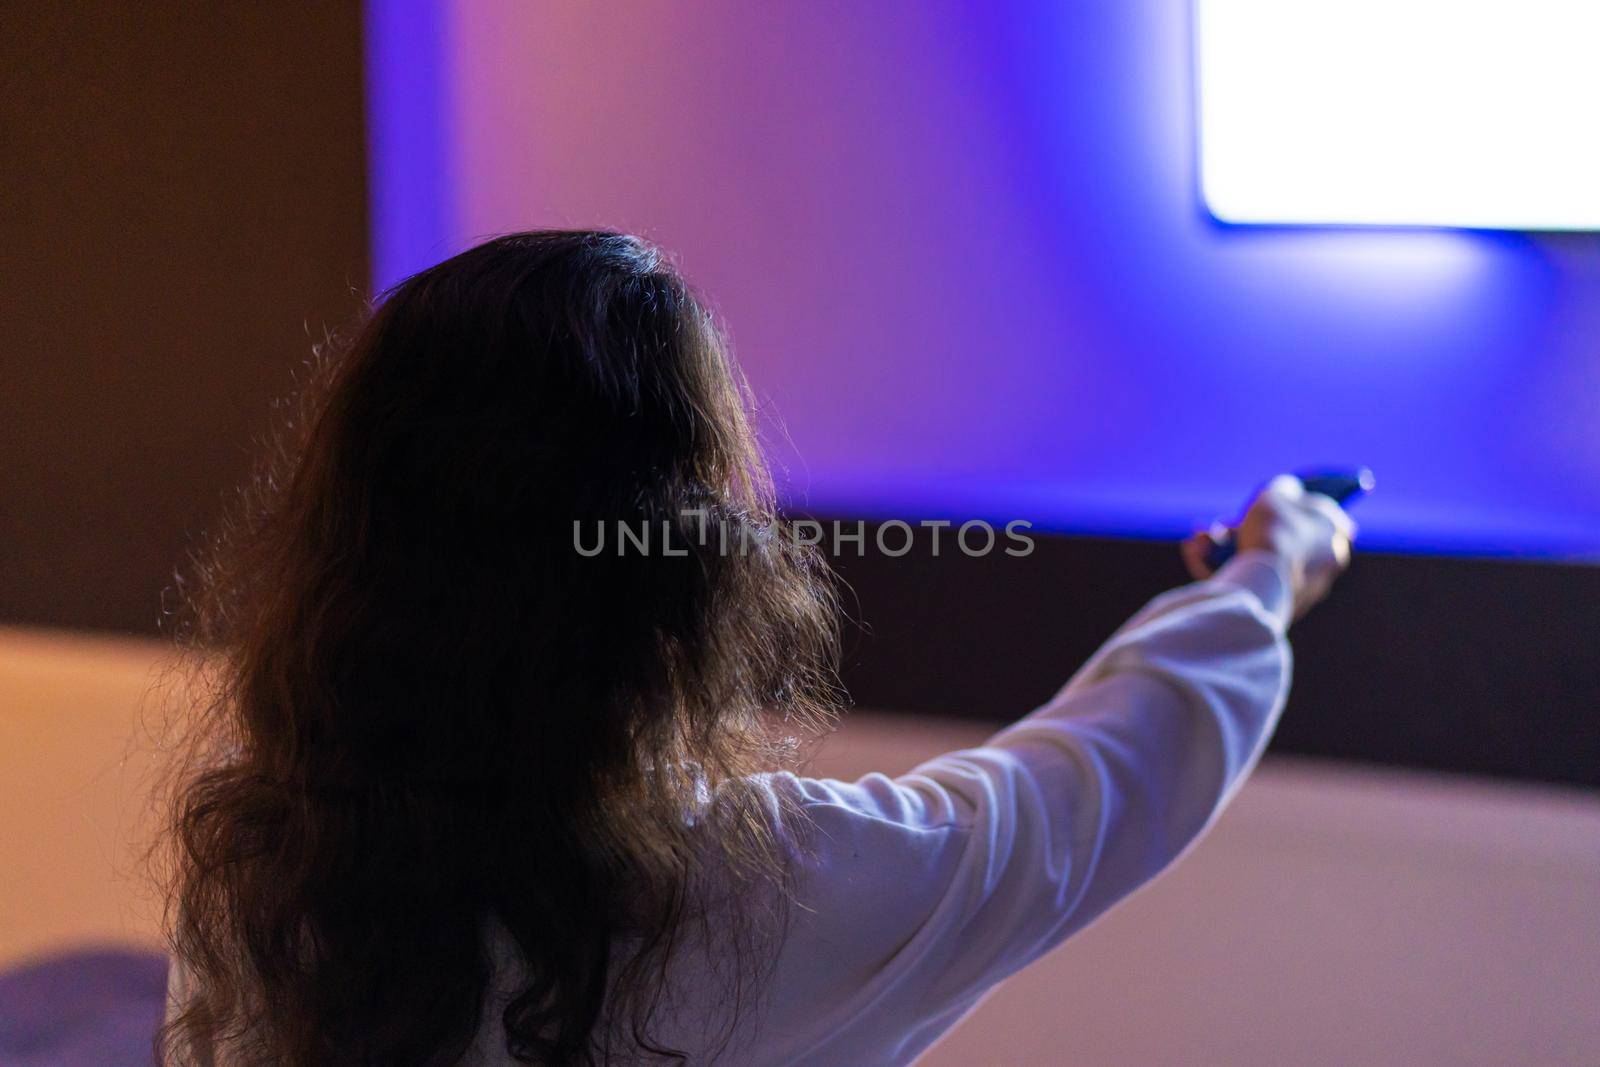 A person watches TV with a remote control in hand, a view from the back.